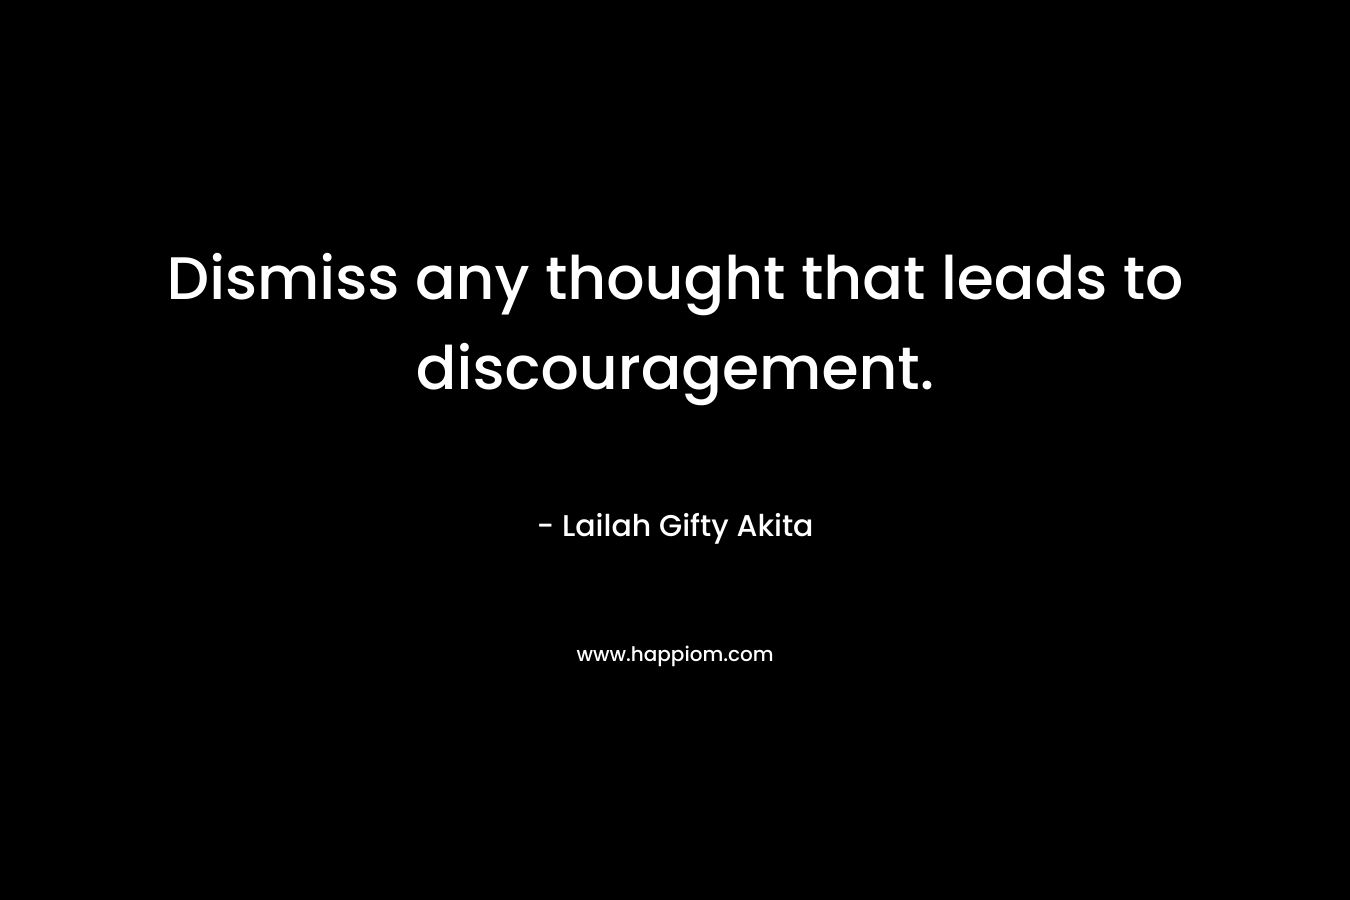 Dismiss any thought that leads to discouragement.